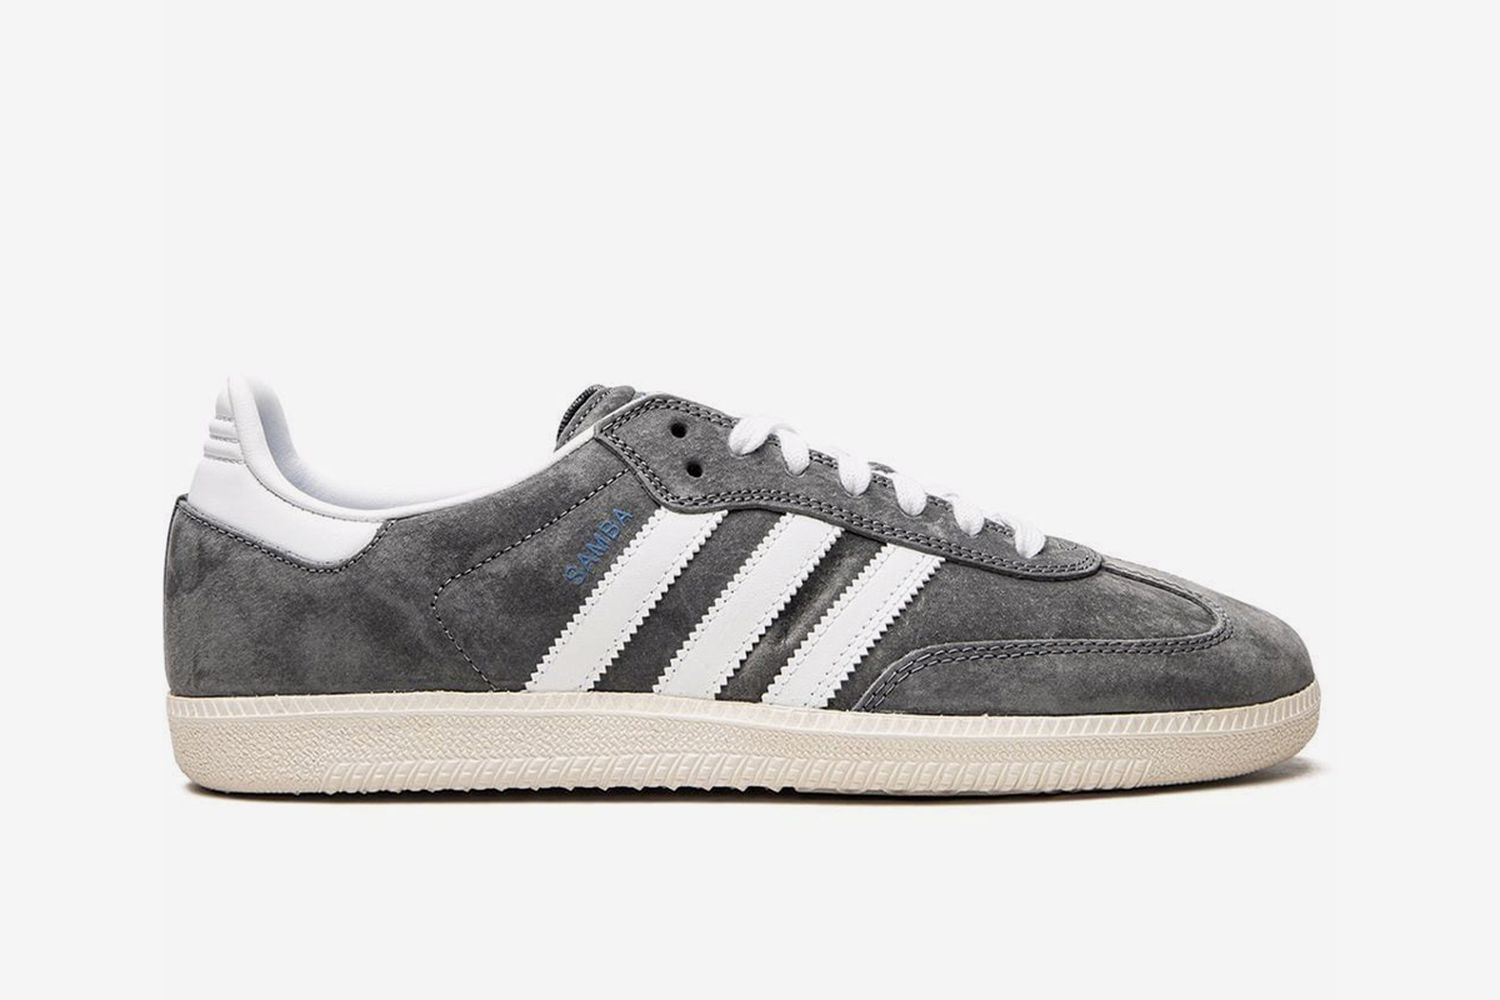 adidas Samba: 8 of the Best to Buy in 2022